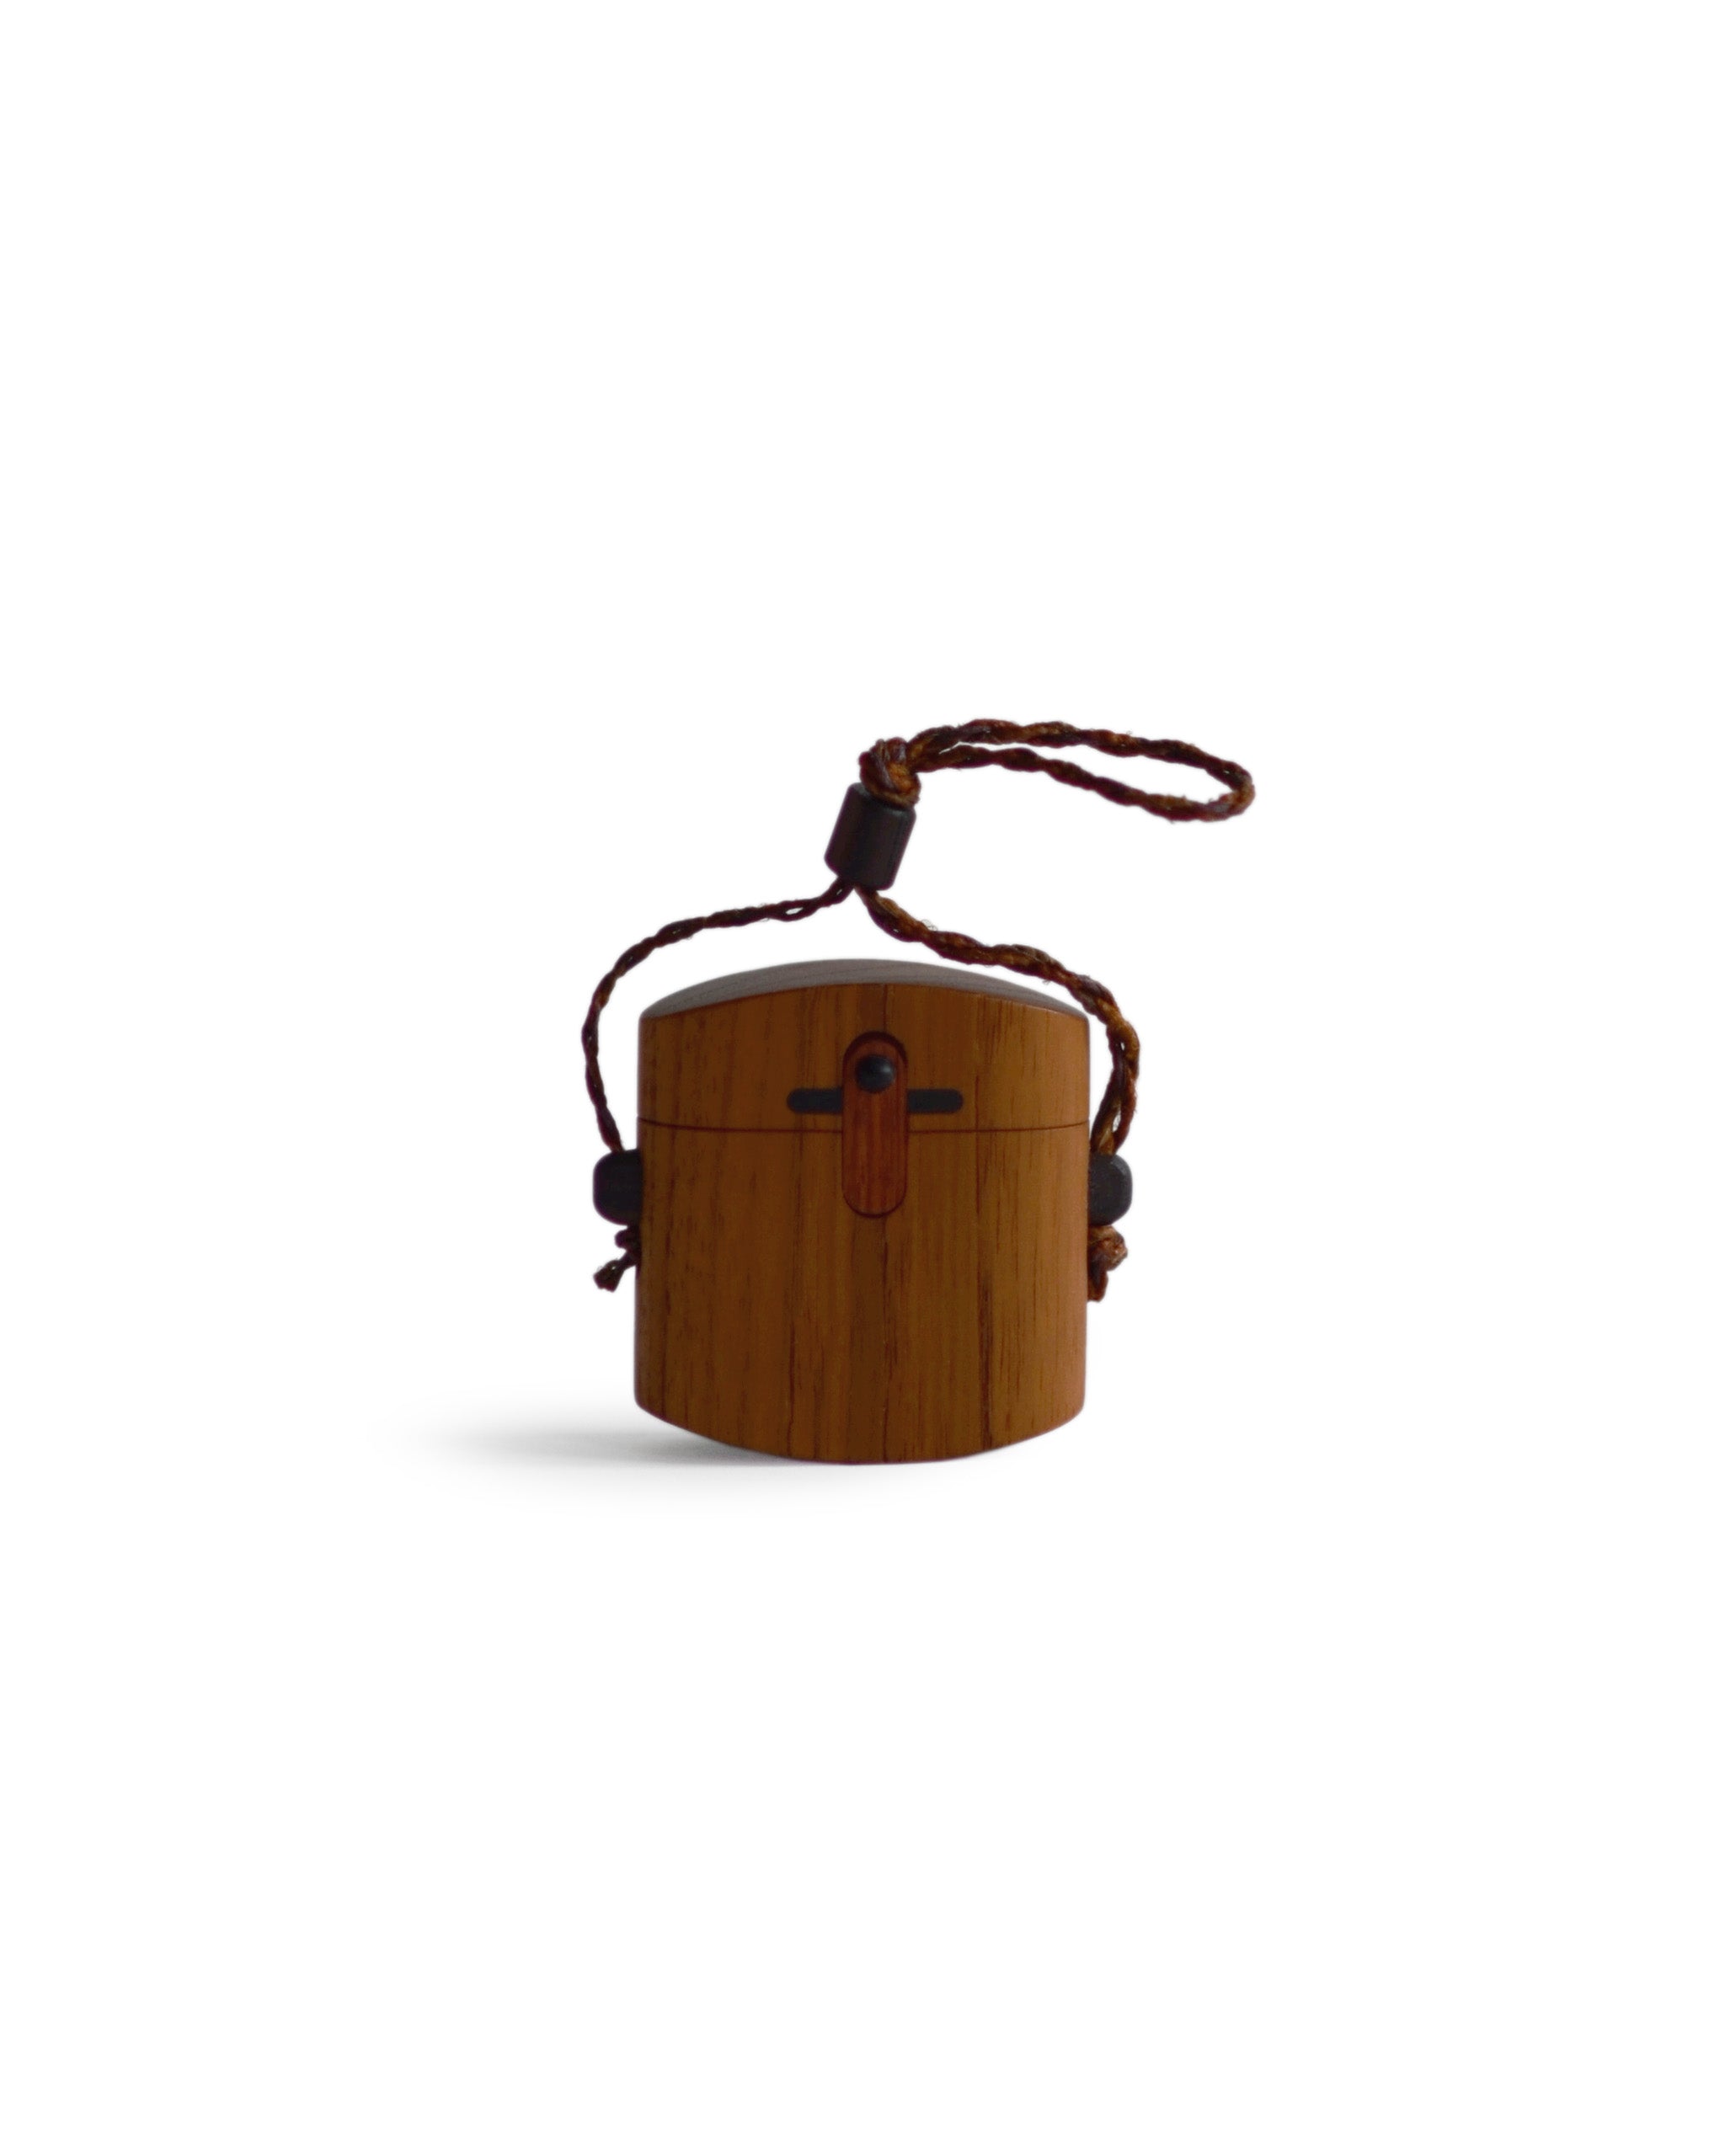 Silhouetted image of walnut pill case with cord by Norio Tanno against white background.